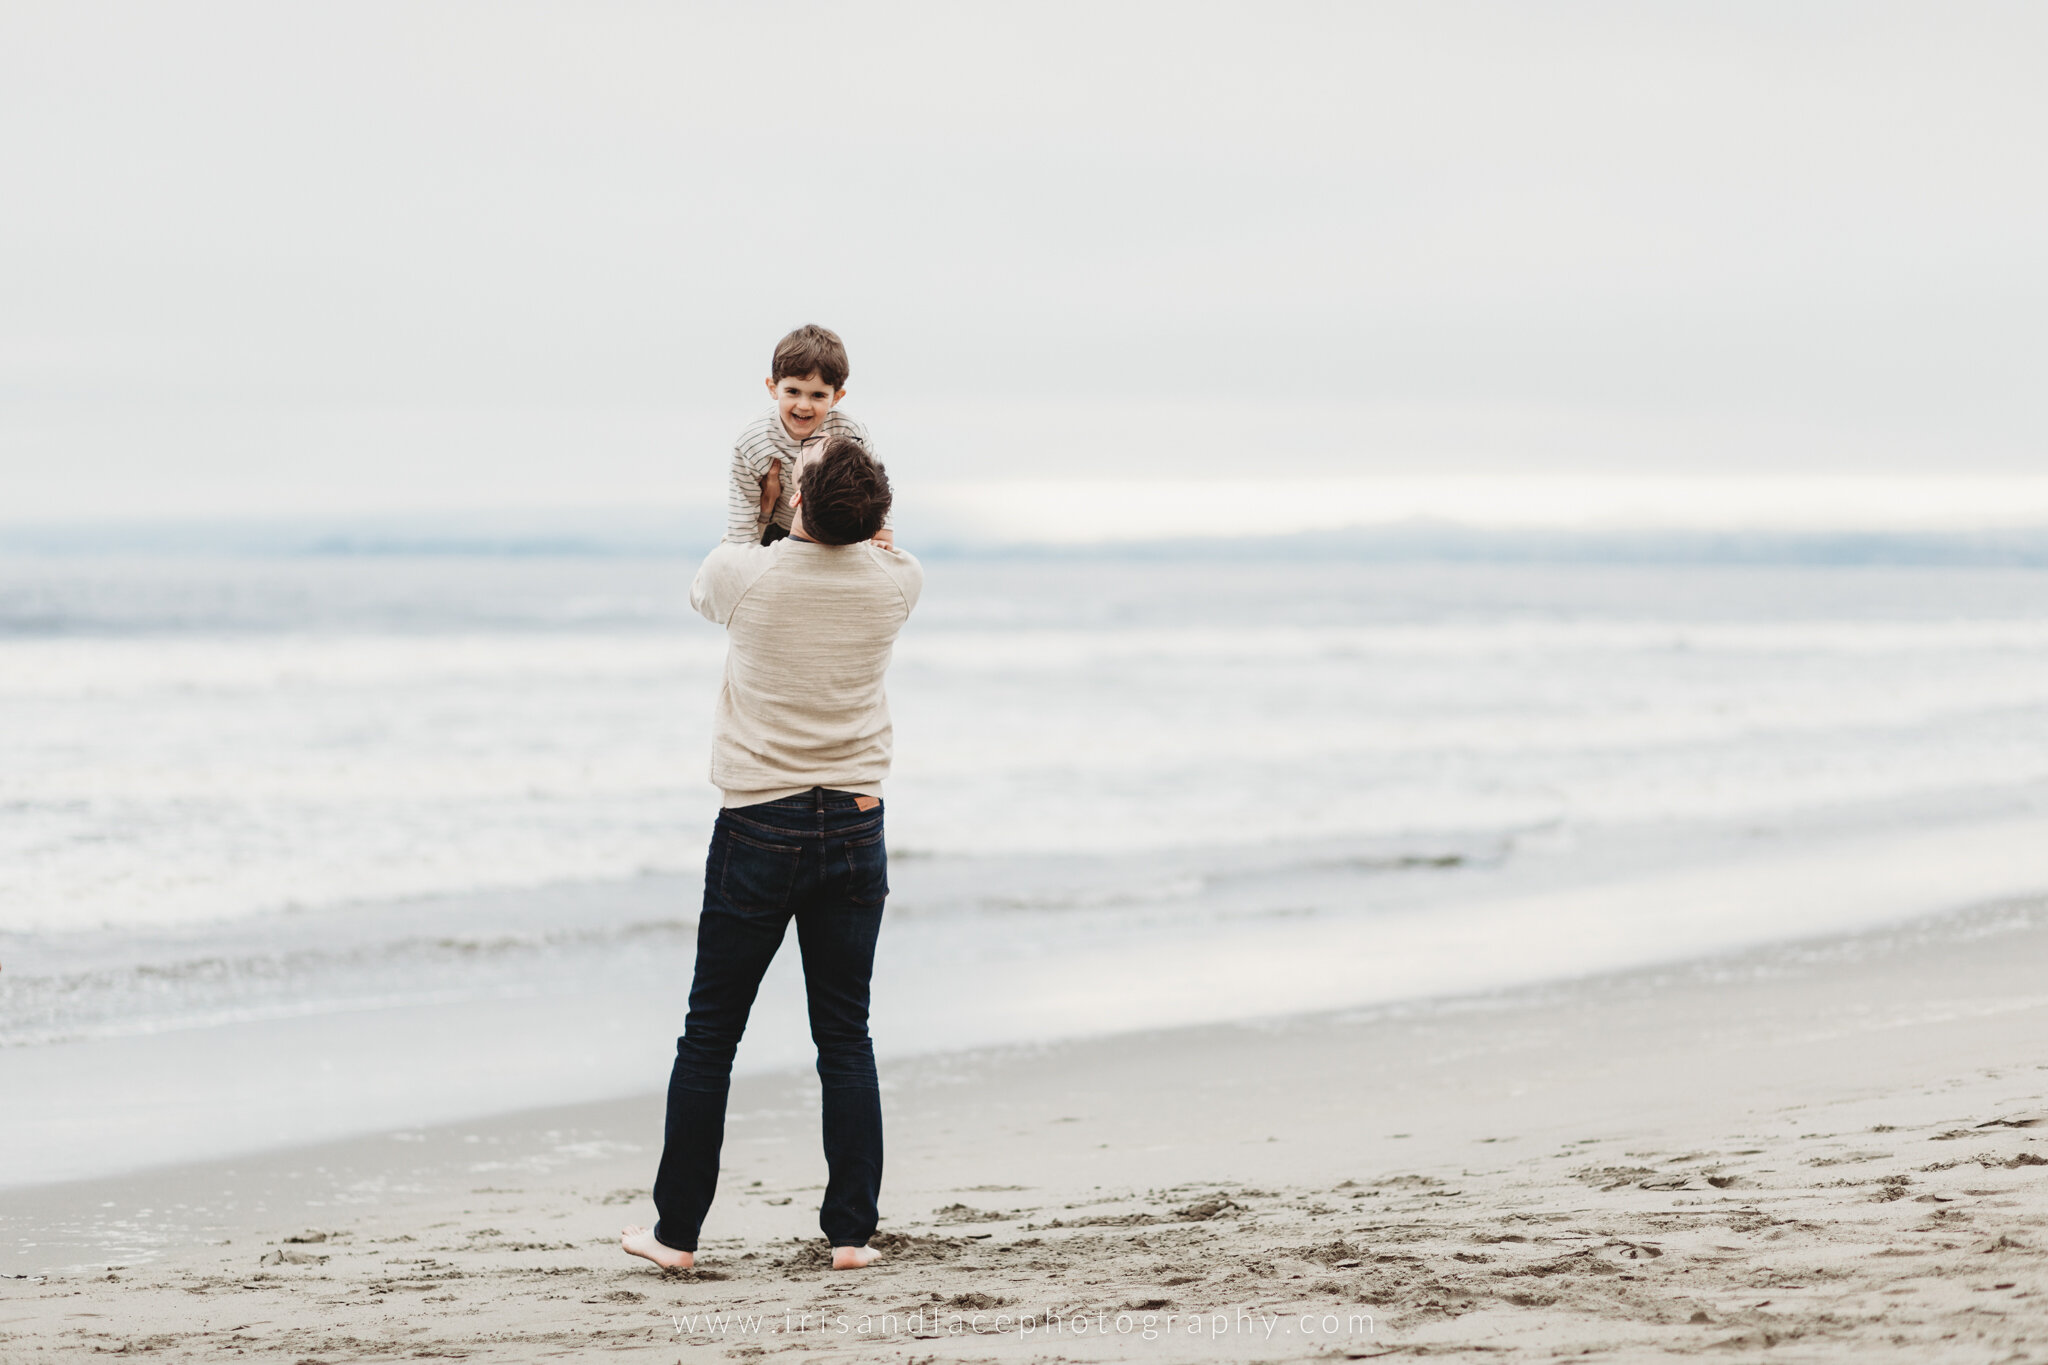 SF Bay Area Foggy Beach Family Photography  |  Iris and Lace Photography